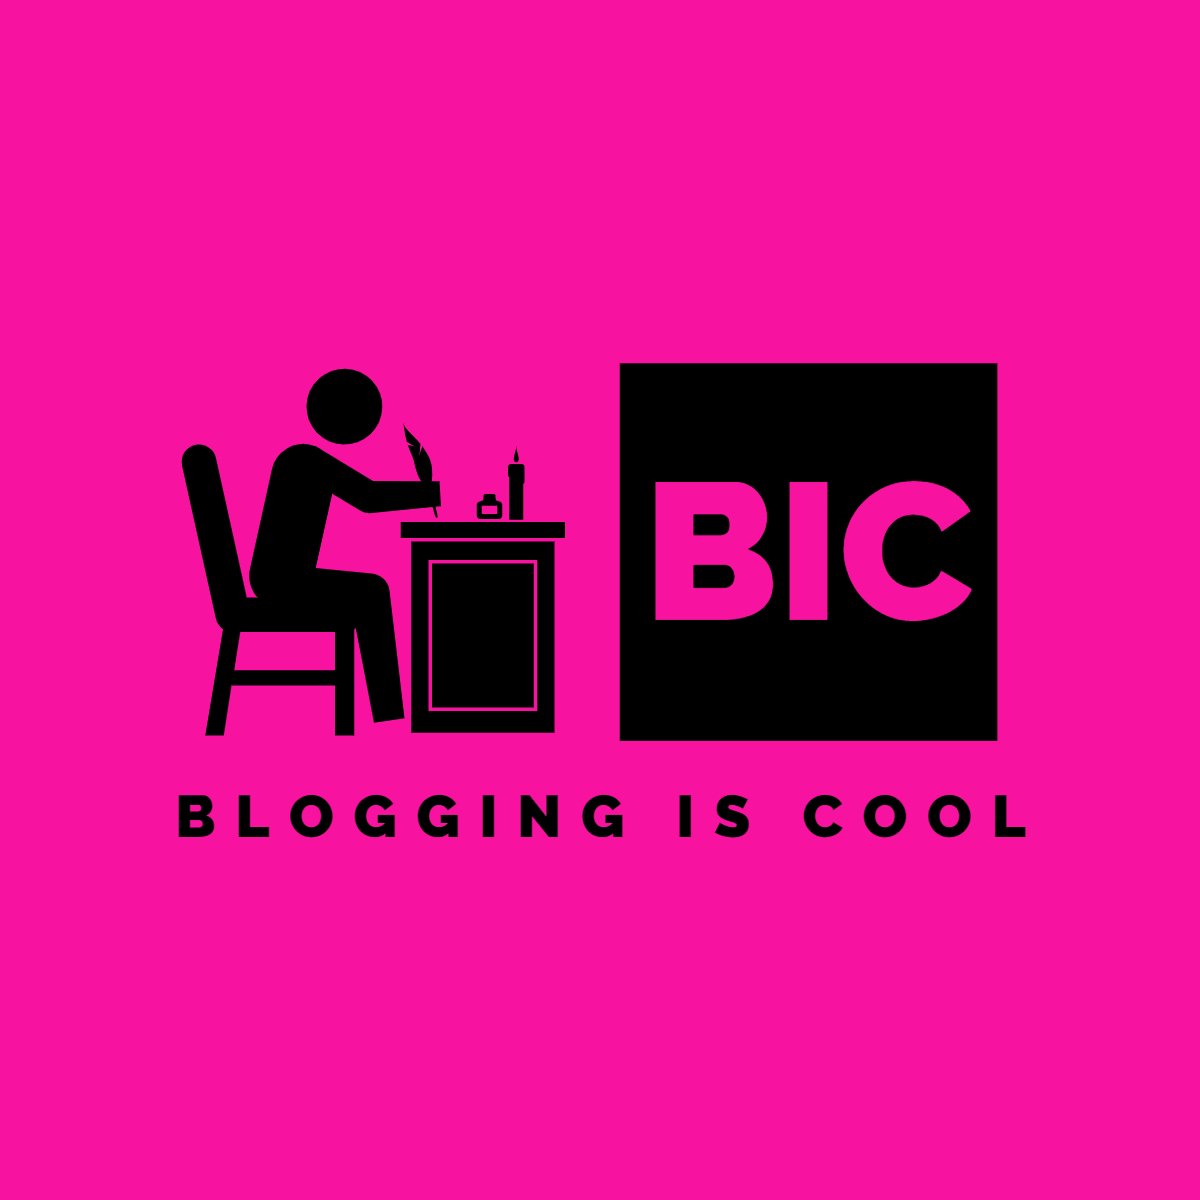 bloggingiscool.com collaborations with other websites for traffic